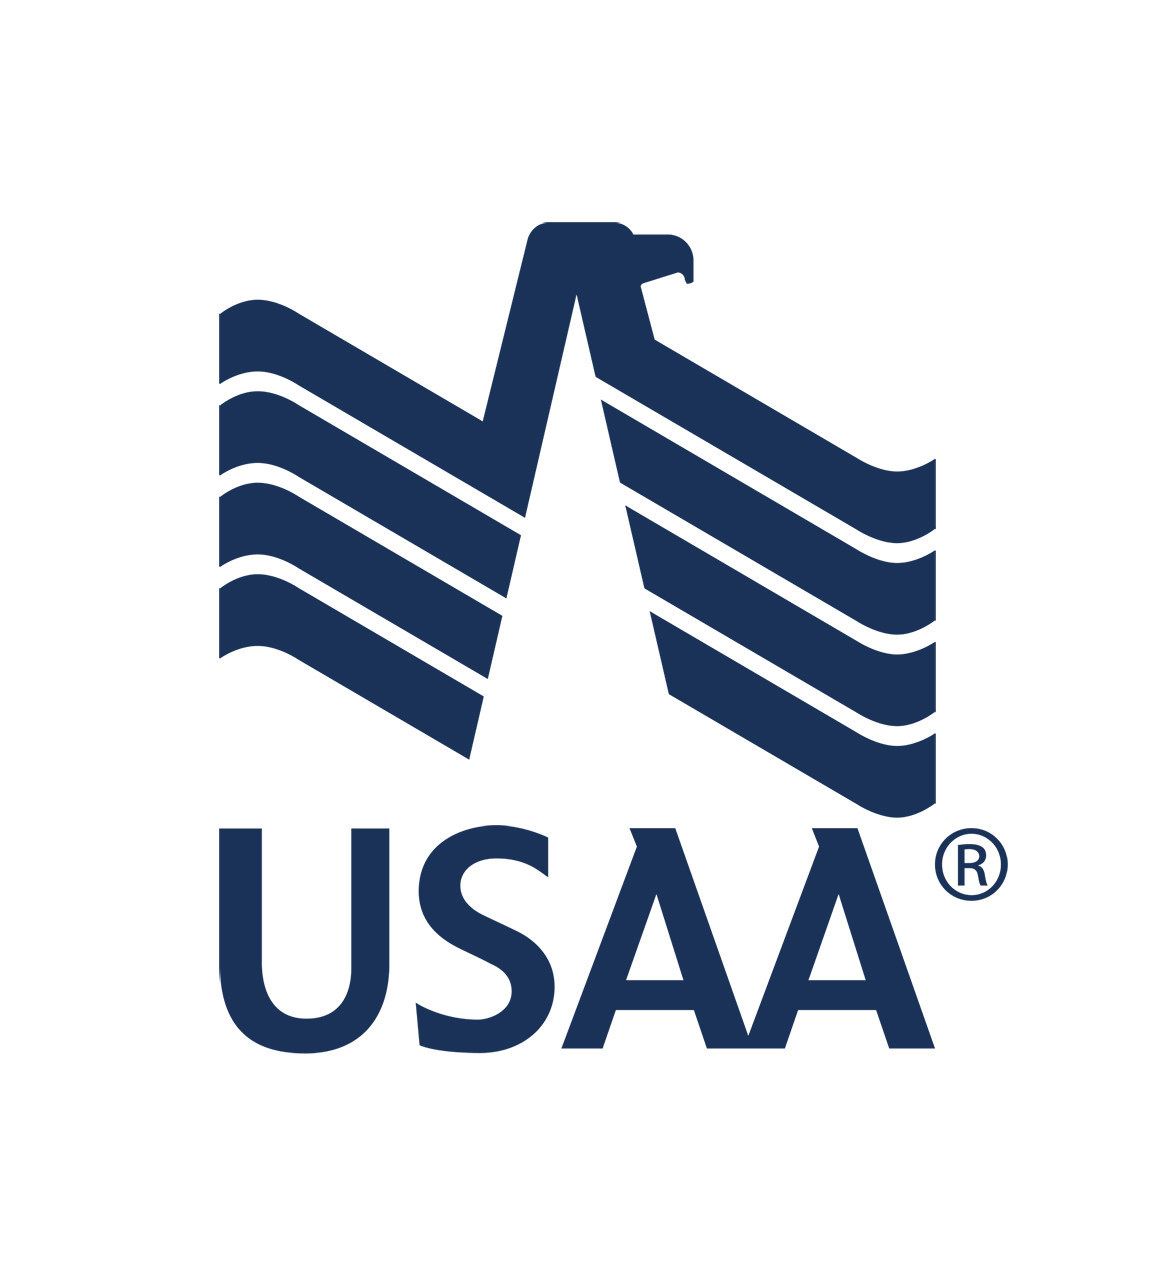 USAA Donates $1.25 Million to Assist Those Impacted by Hurricane Ian